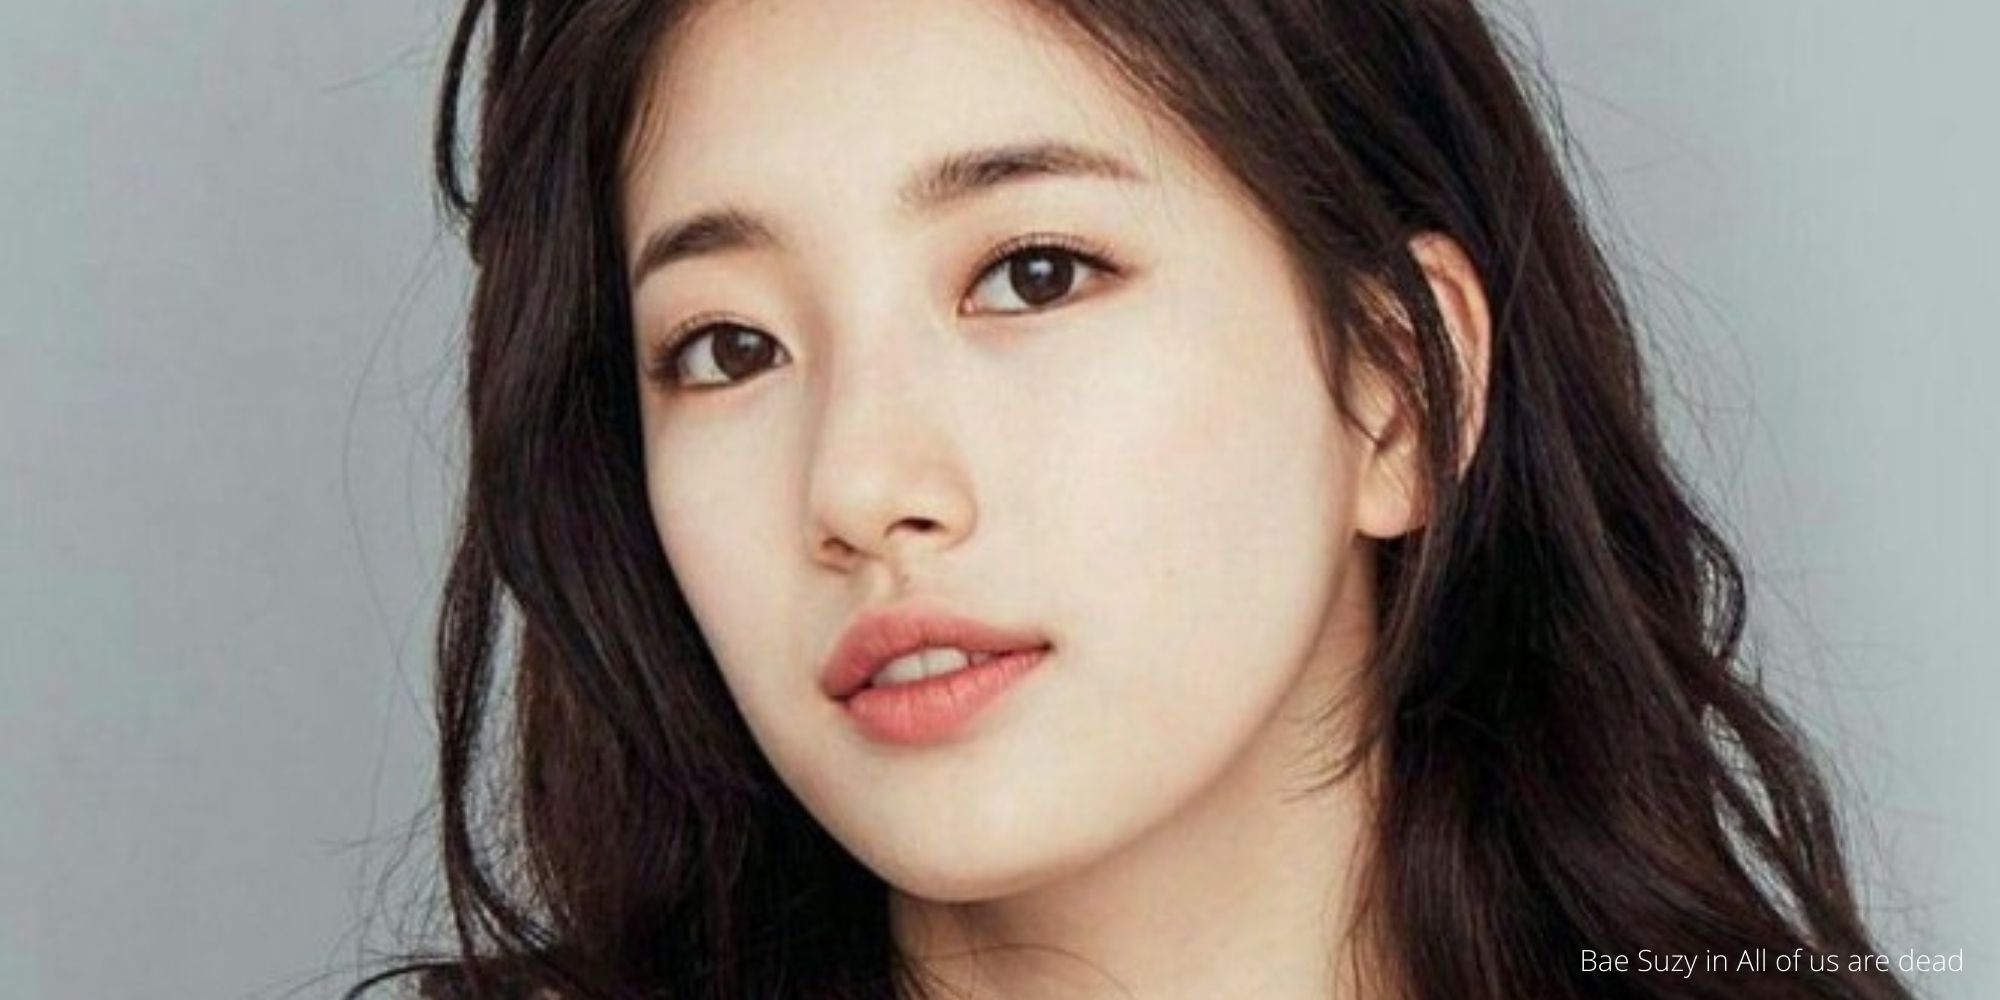 Bae Suzy in All of us are dead